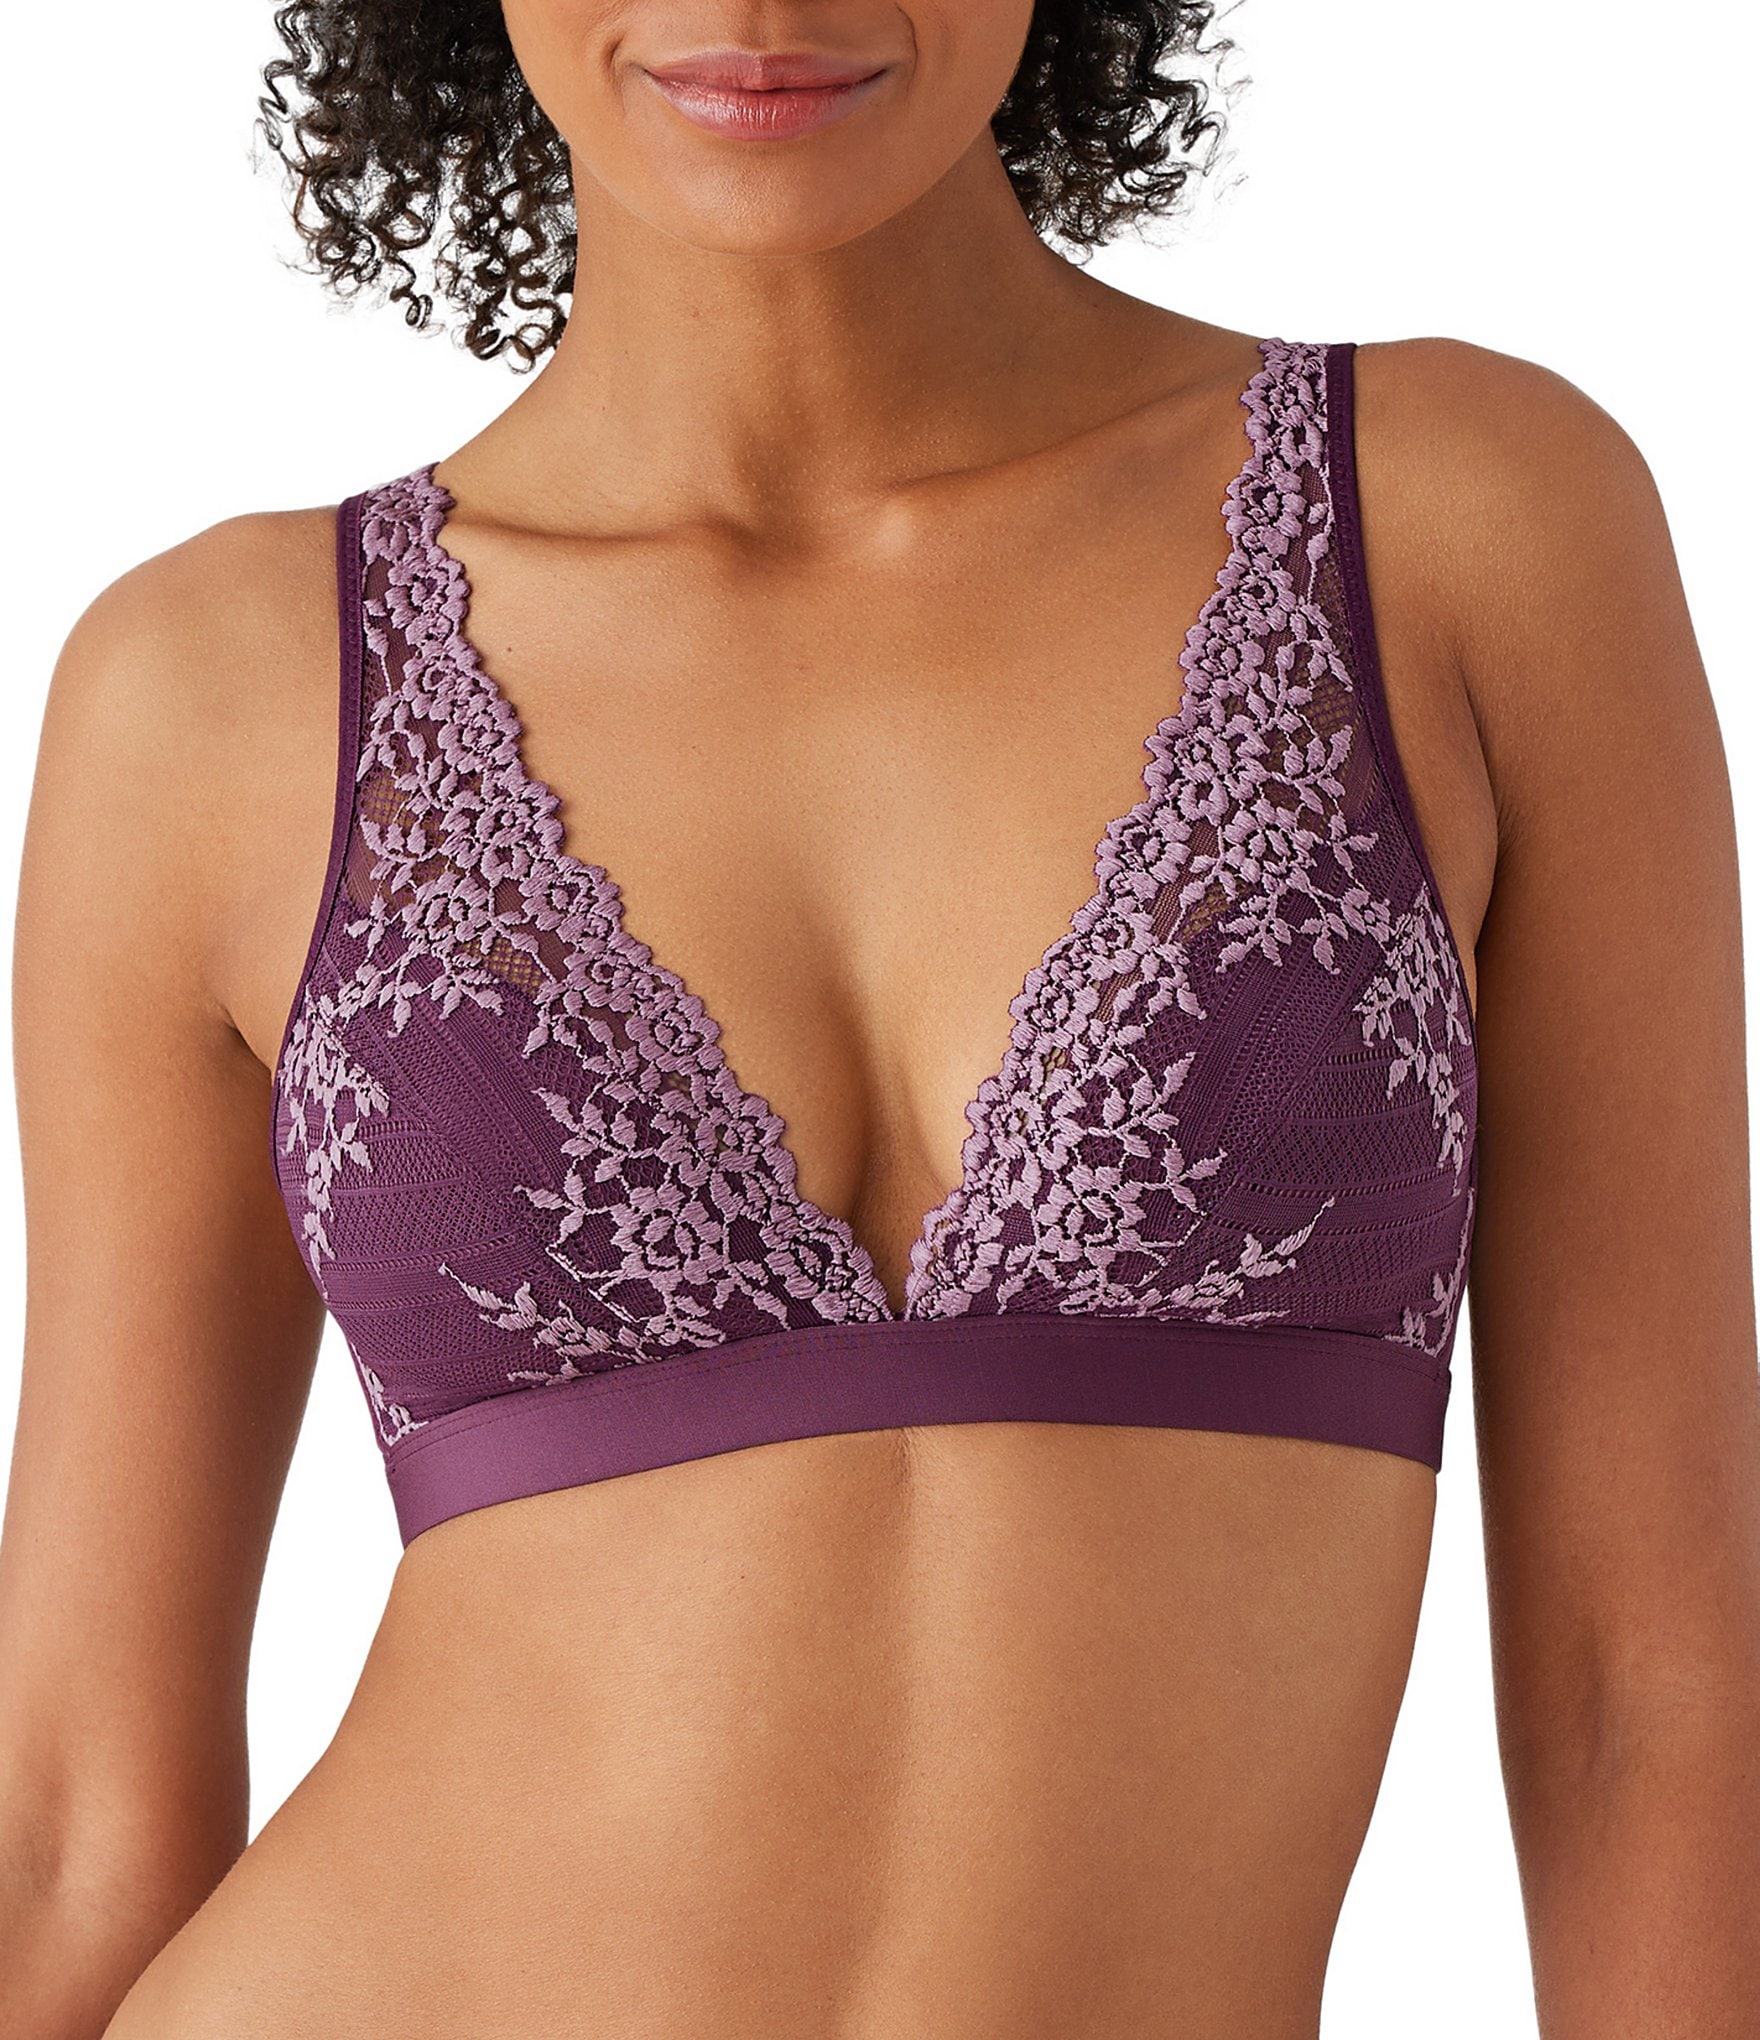 Wacoal At Ease Seamless Underwire Bra Size 34G Dusty Orchid Mauve Purple